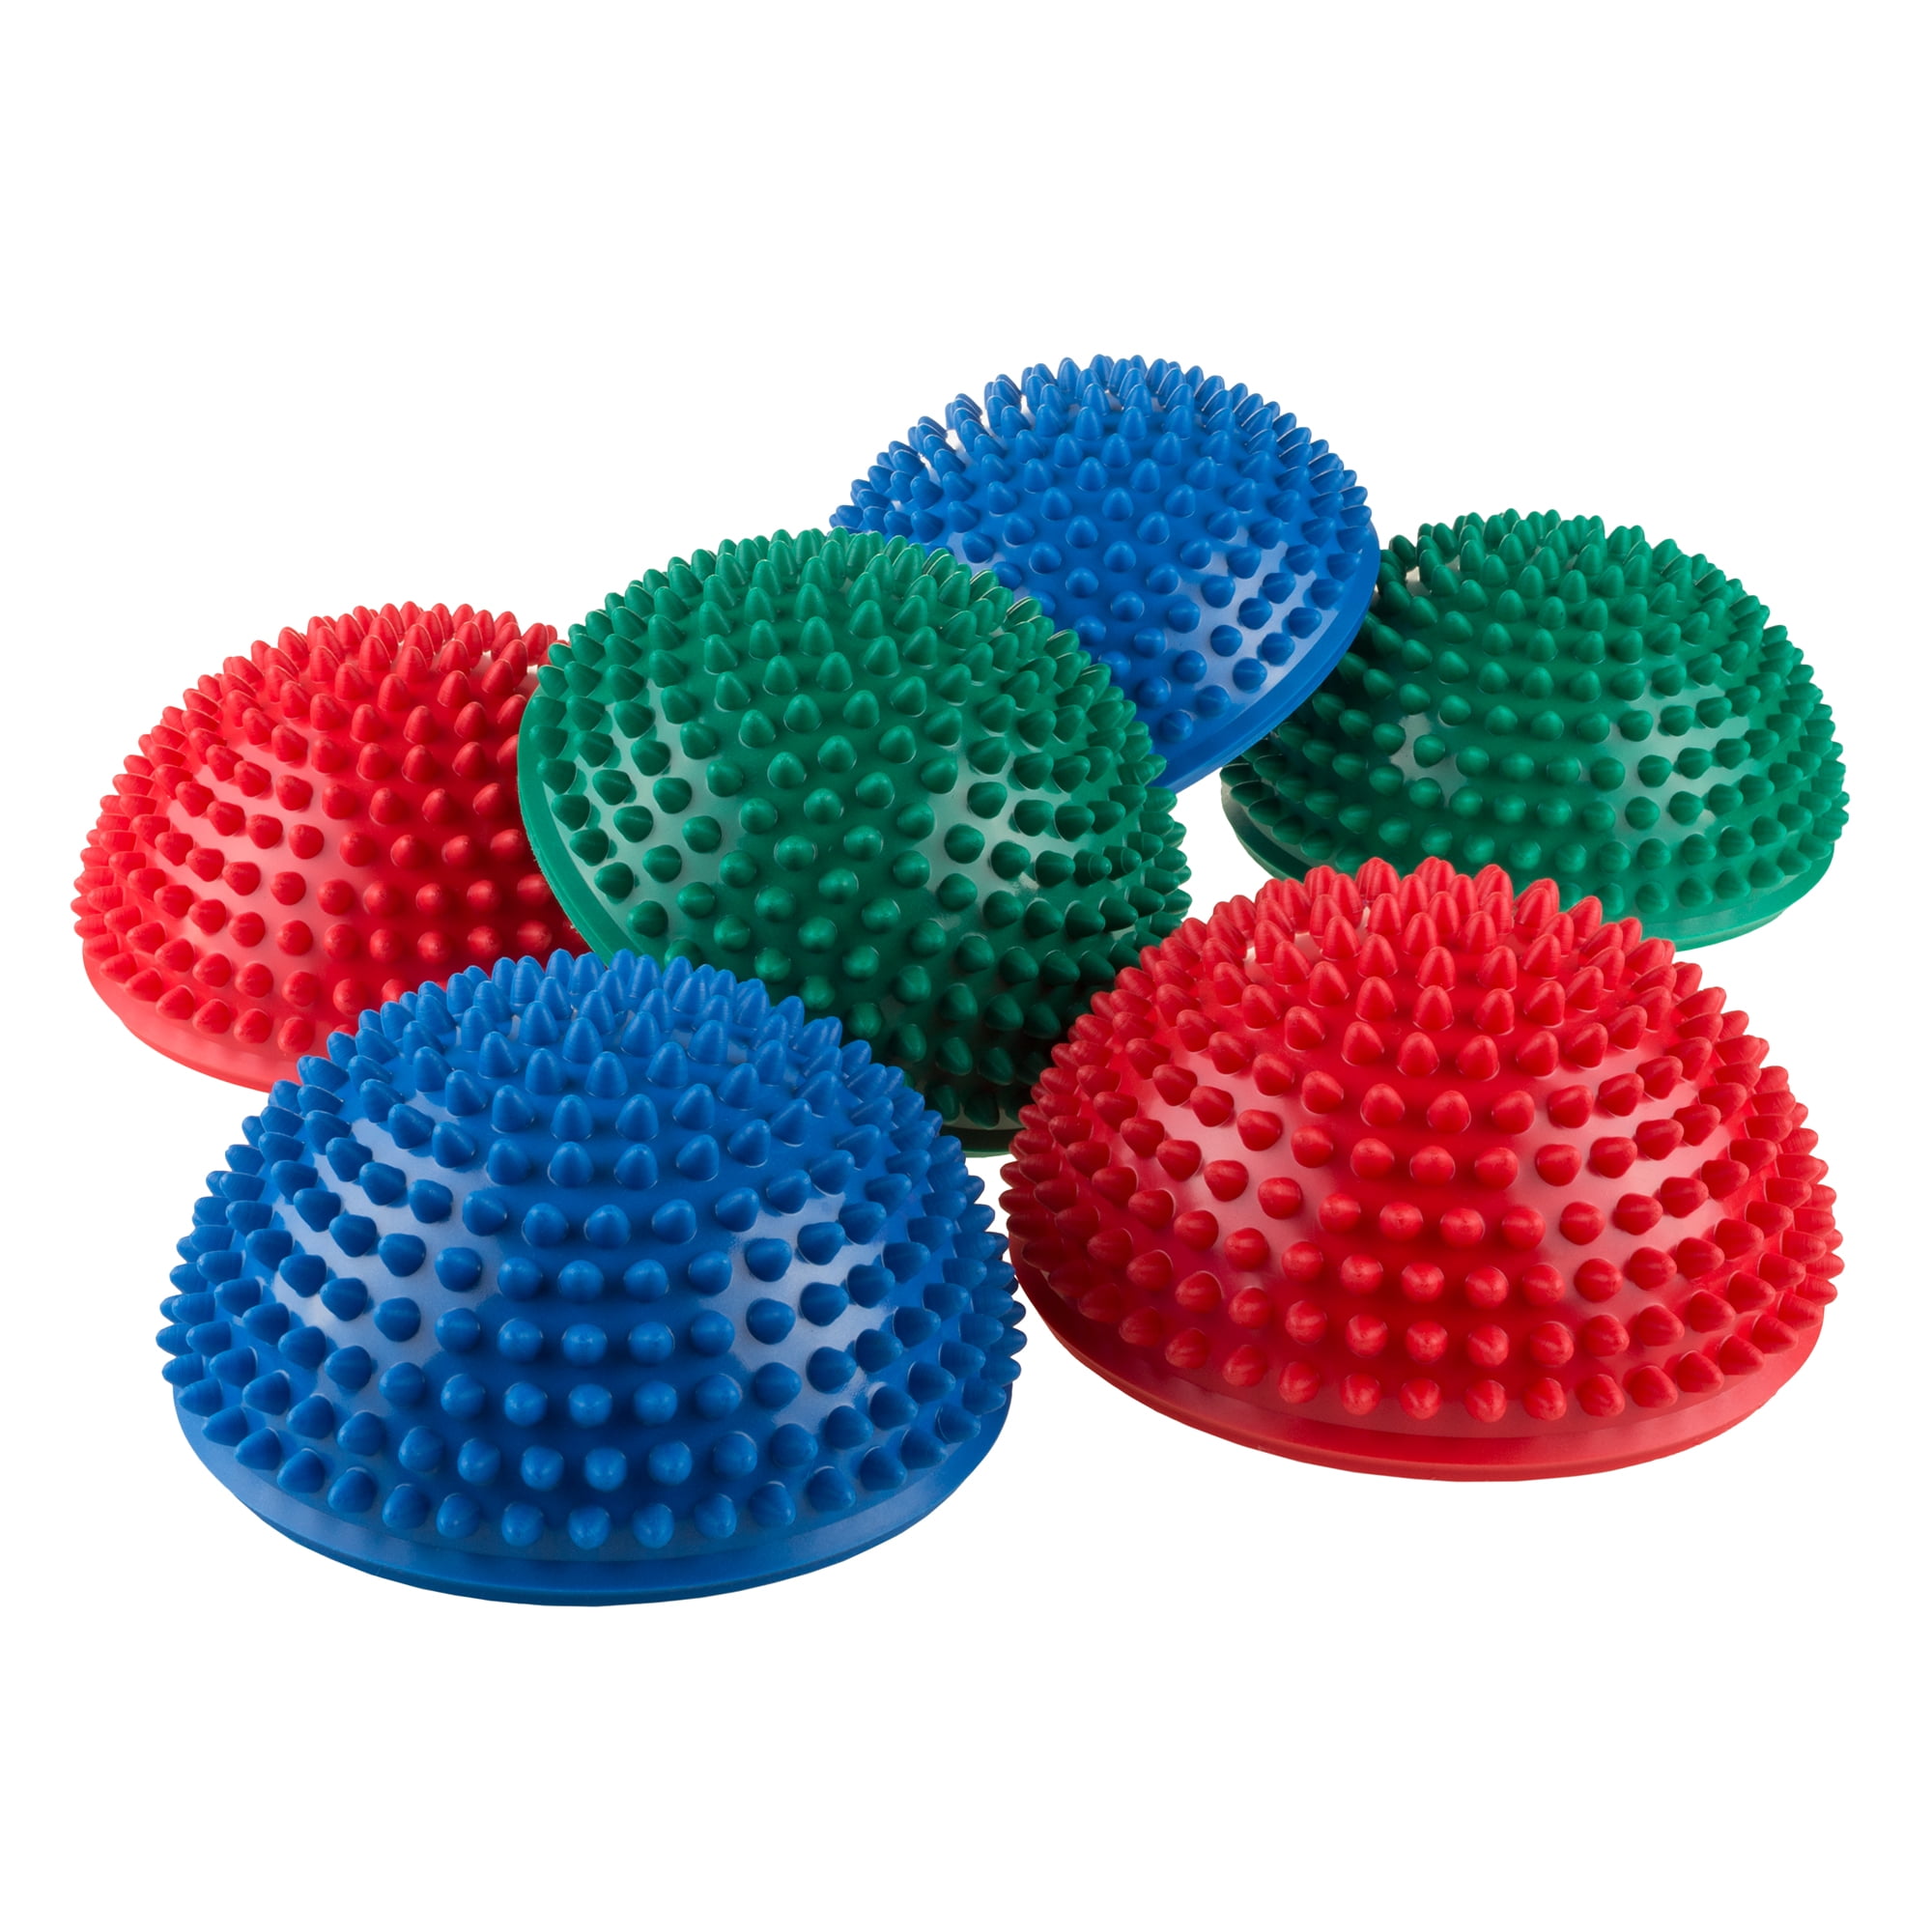 Stability Training Motor Skills Yoga Gymnastics Exercise Foot Massage Muscle Balancing Therapy 2PCS Hedgehog Balance Pods Half Spiky Fitness Domes for Kids Adults Sports Pimples Pilates Ball